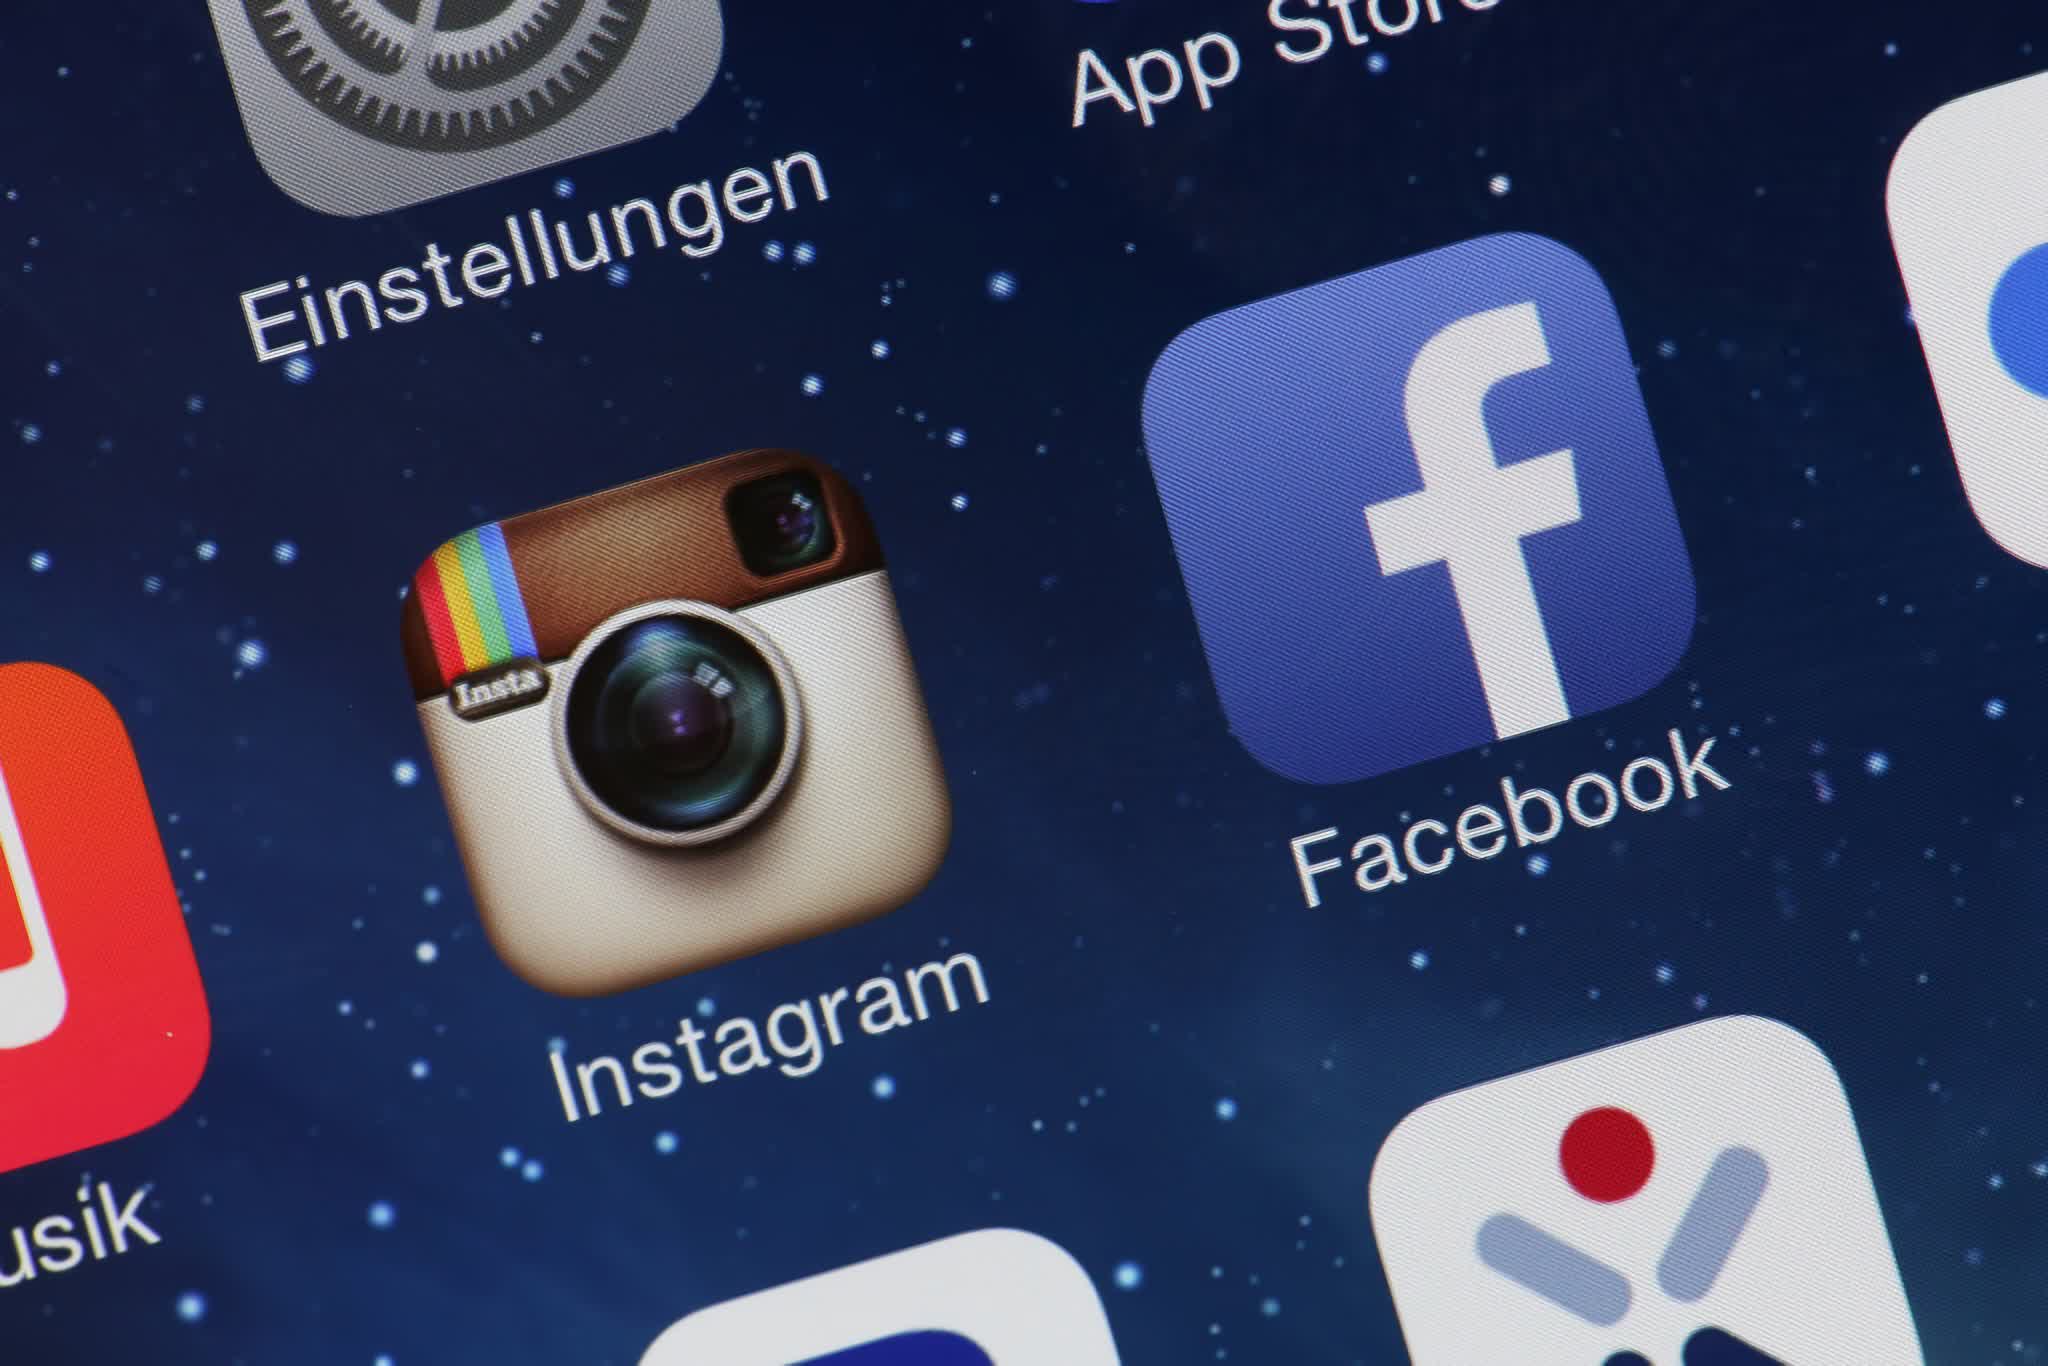 Meta might roll out ad-free Instagram and Facebook subscriptions in the EU